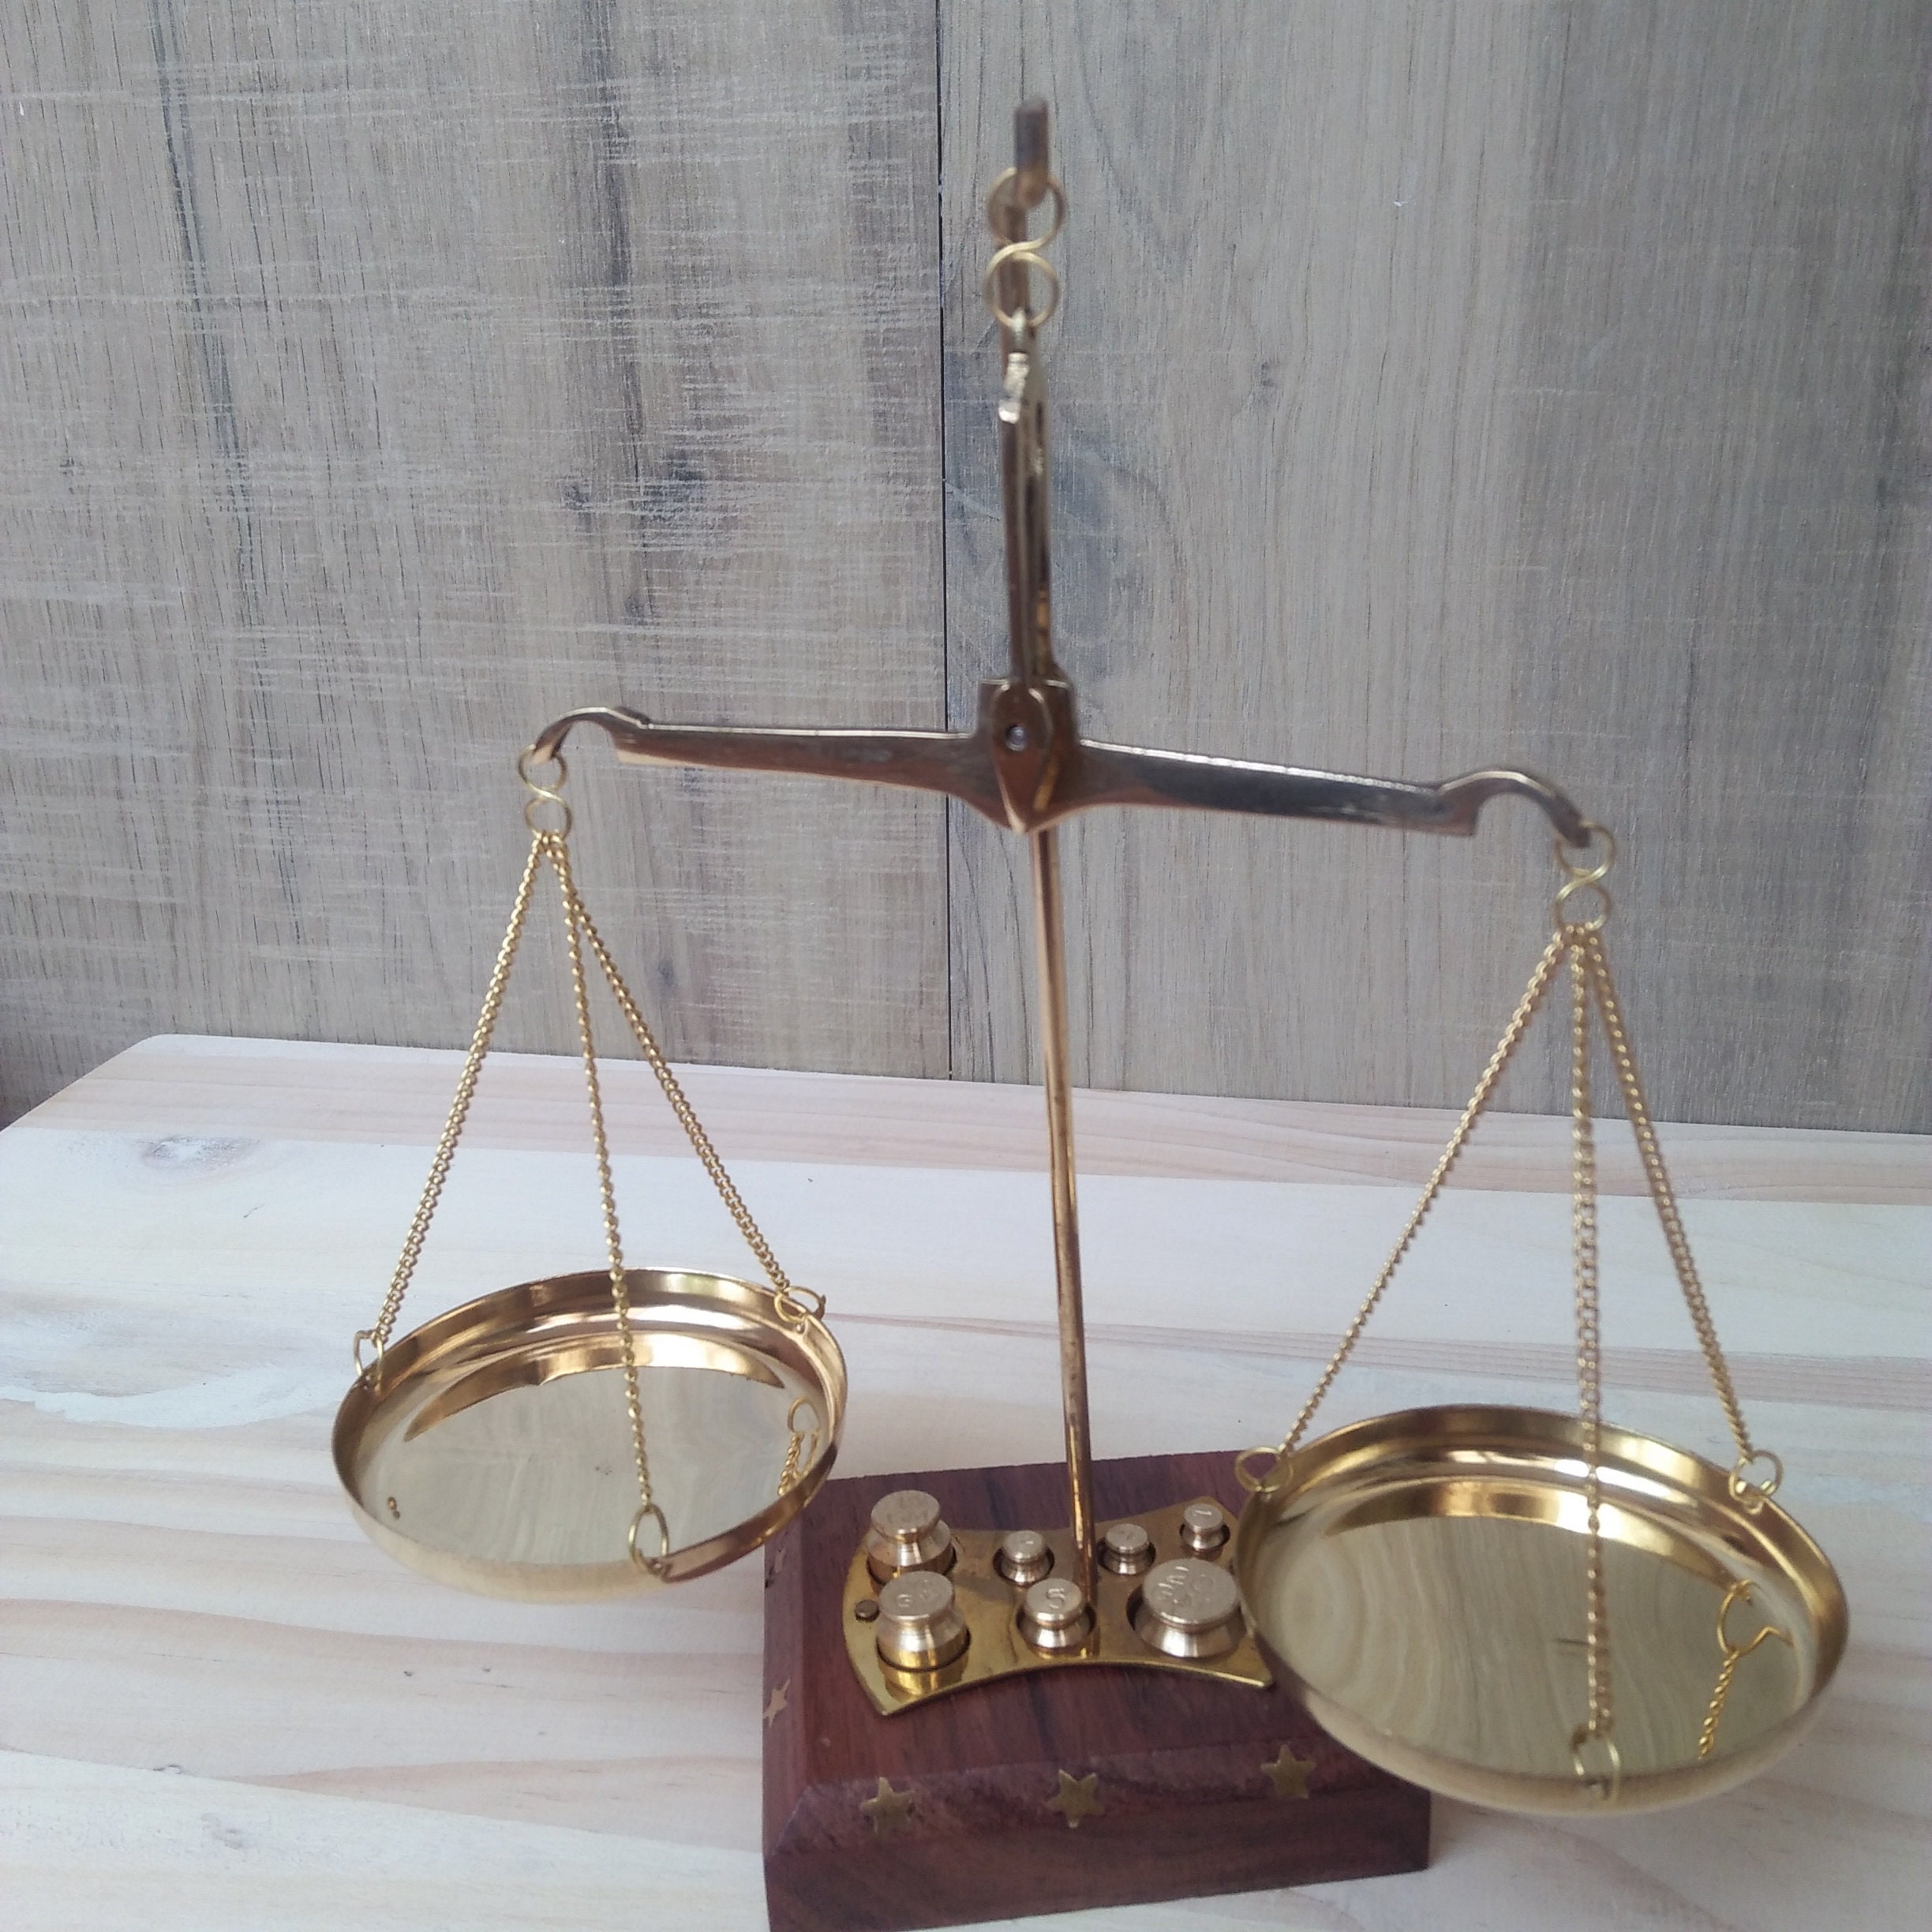 Buy Old Balance Scales Online In India -  India